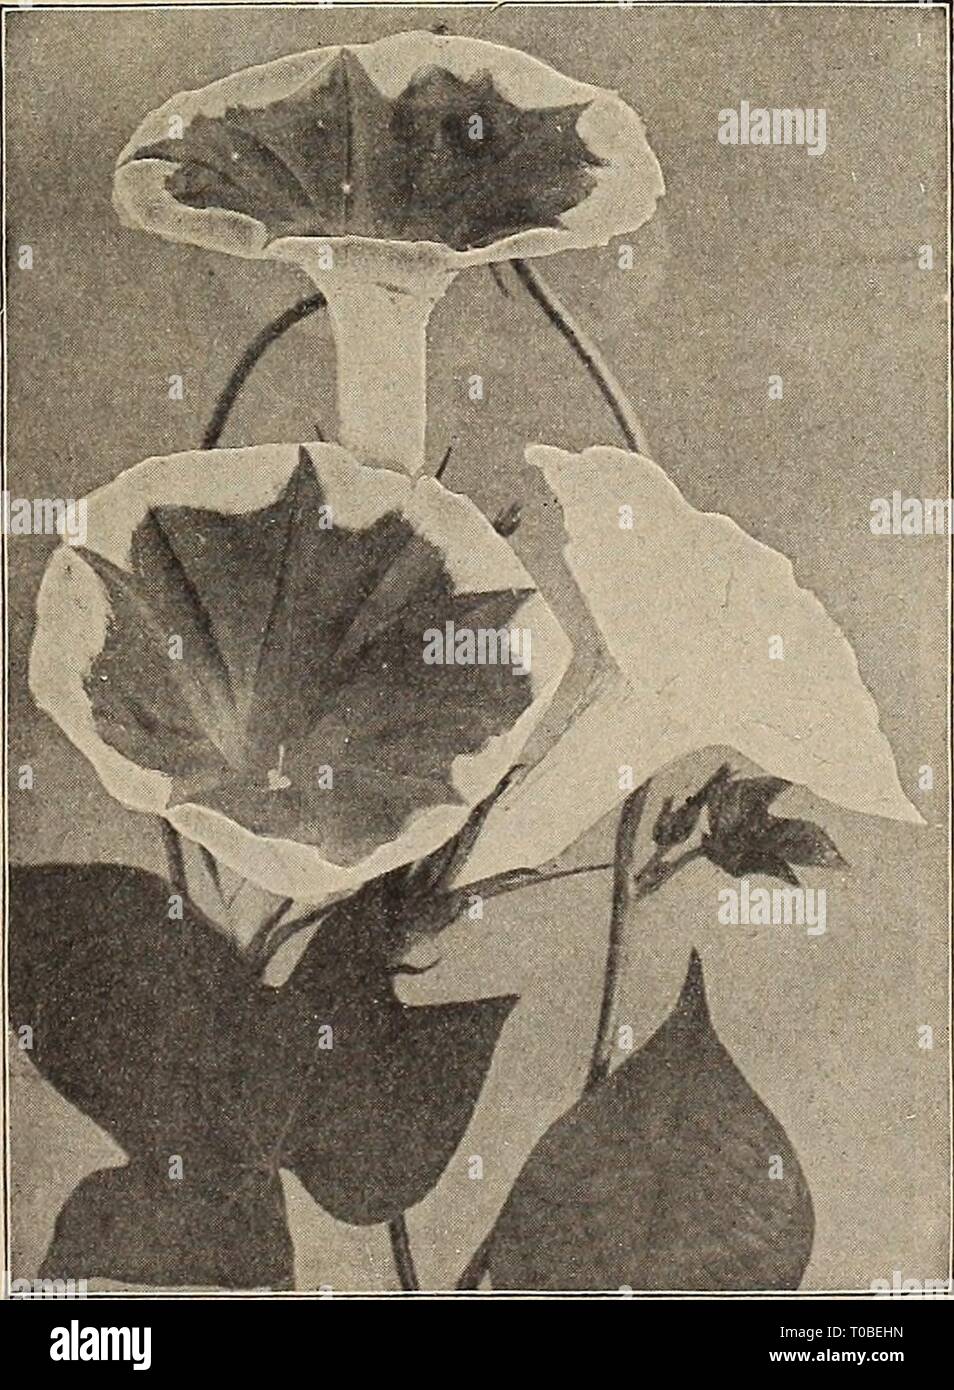 Dreer's garden book 1920 (1920) Dreer's garden book 1920 dreersgardenbook1920henr Year: 1920  HUNNKMANNIA HONESTY I]tIP.A. jnE&lt;3*S (Sultan's or Zanzibar Balsam) Charming plants for the decoration of the greenhouse or dinner table, producing bright, waxy-looking flowers profusely and almost continuously. The young seedlings should be carefully handled, as they are exceedingly brittle at the outset. per pkt. 2842 Sultani. Flowers of brilliant rosy-scarlet color 25 2845 Holstii Hybrids. Forms strong bushy plants, about 2 feet high, covered with attractive flowers; when grown as pot plants, the Stock Photo